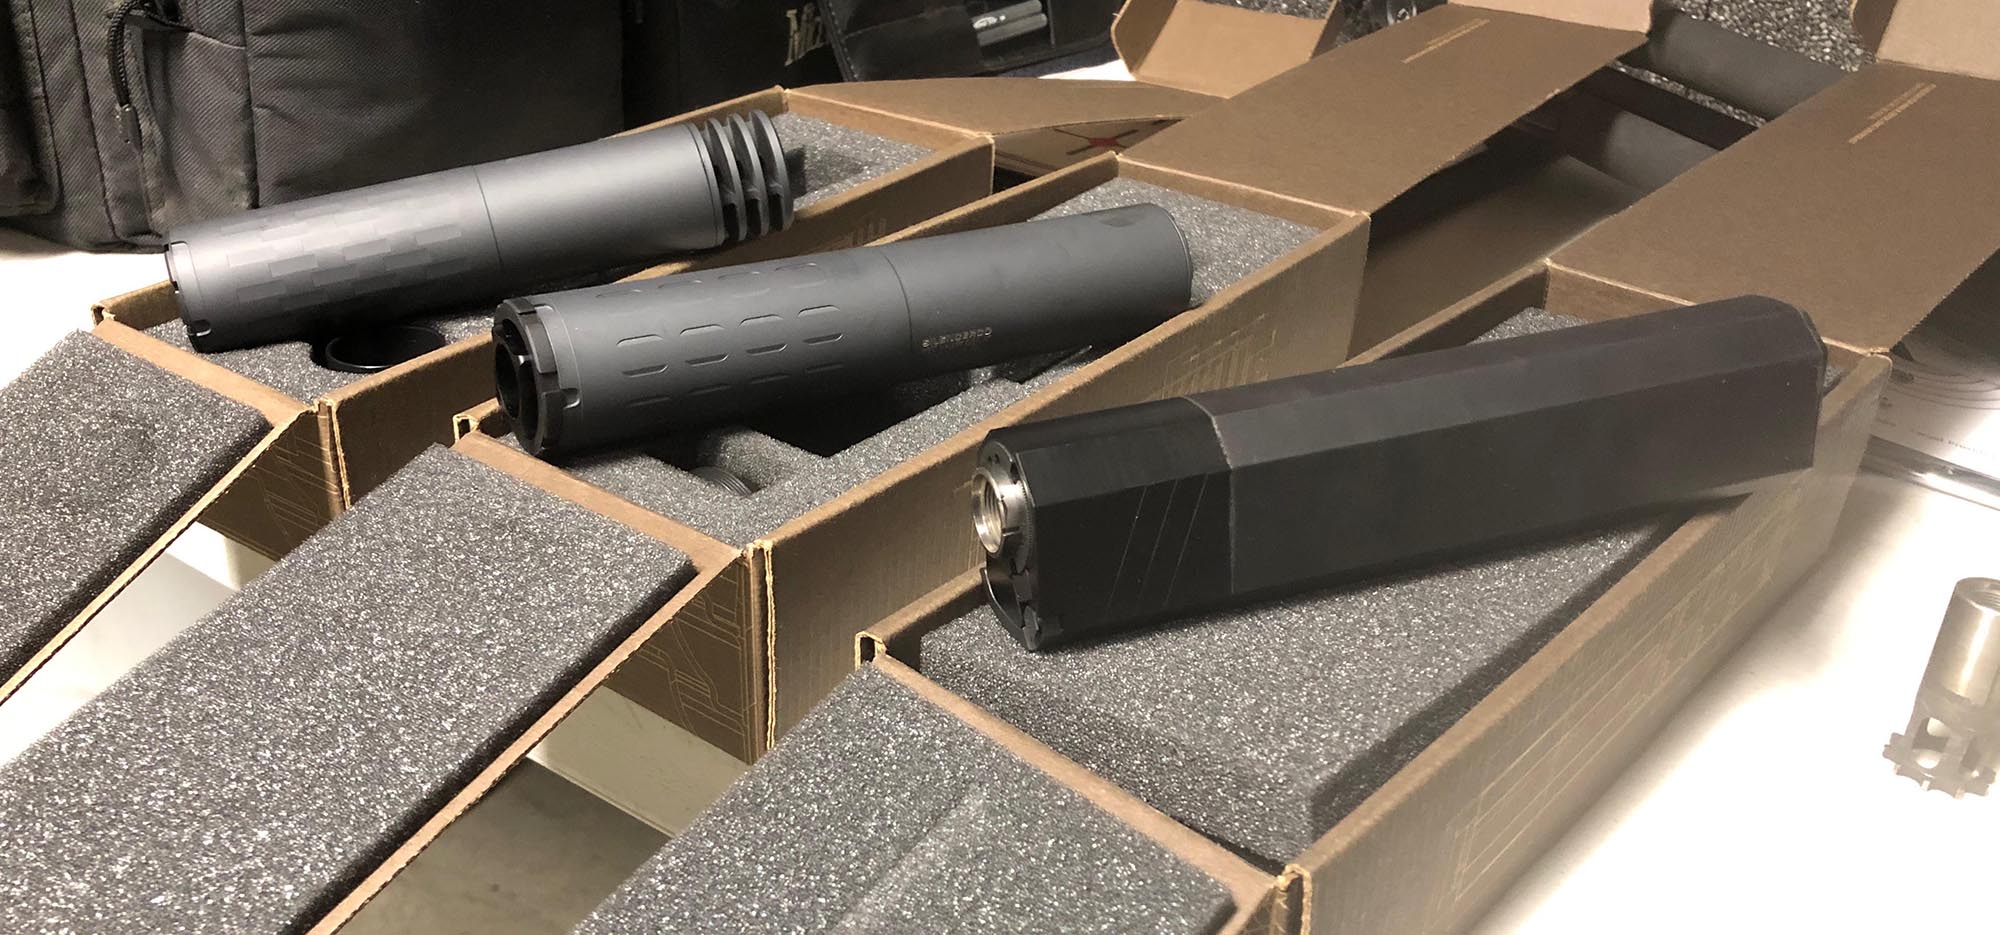 What are you all running for suppressors? 